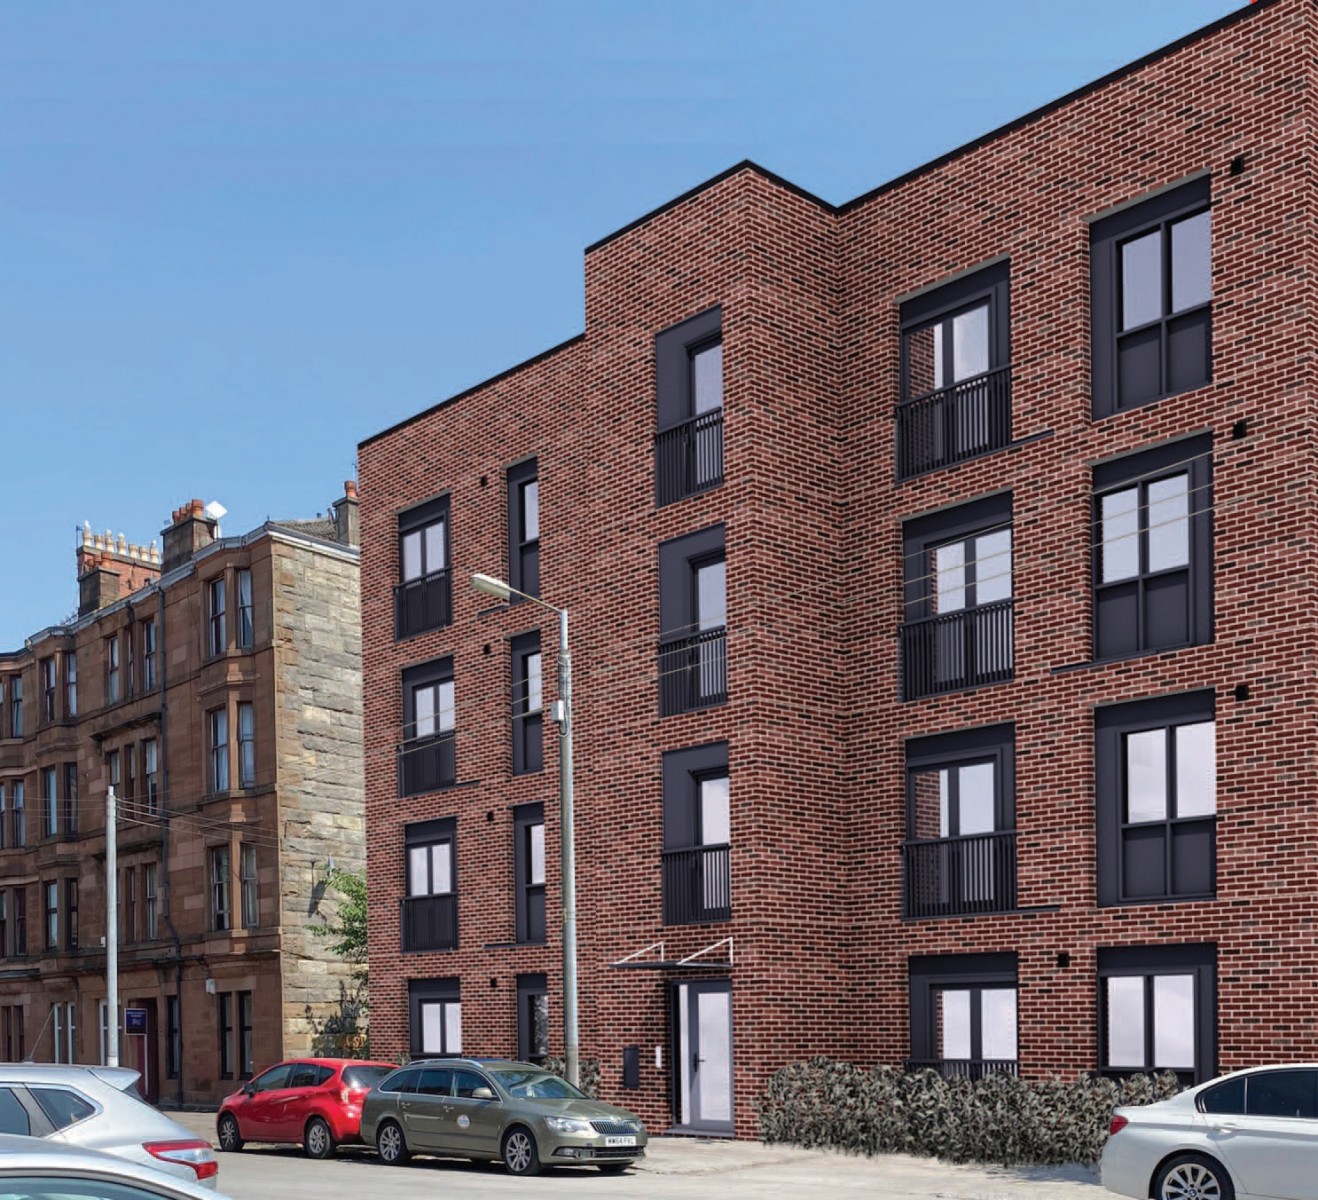 Social rented flats planned for Govanhill gap site